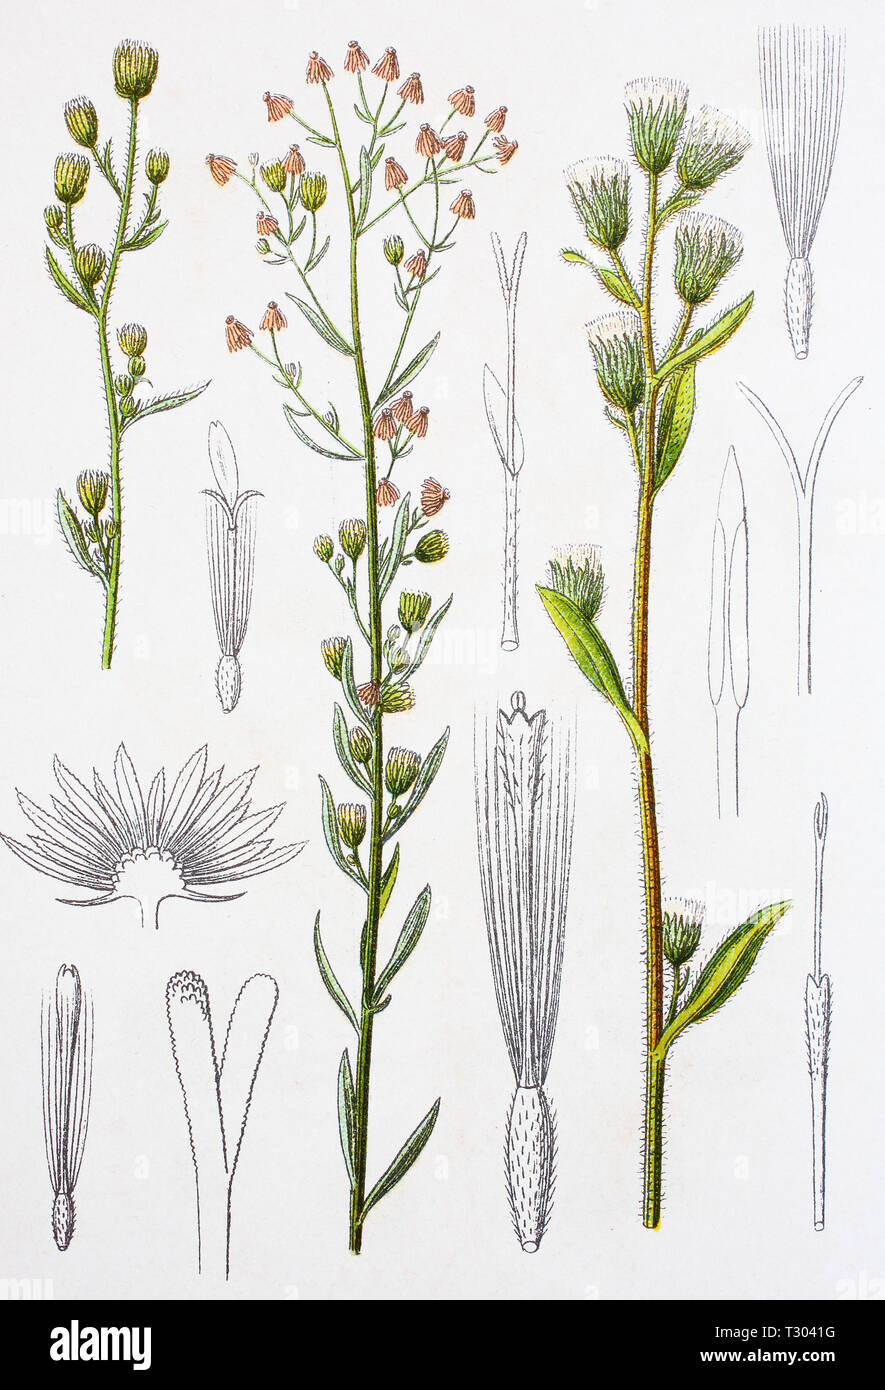 Digital improved reproduction of an illustration of, echtes Franzosenkraut und gemeines Berufkraut, Erigeron canadensis, Erigeron acris, Canadian horseweed and bitter fleabane, from an original print of the 19th century Stock Photo